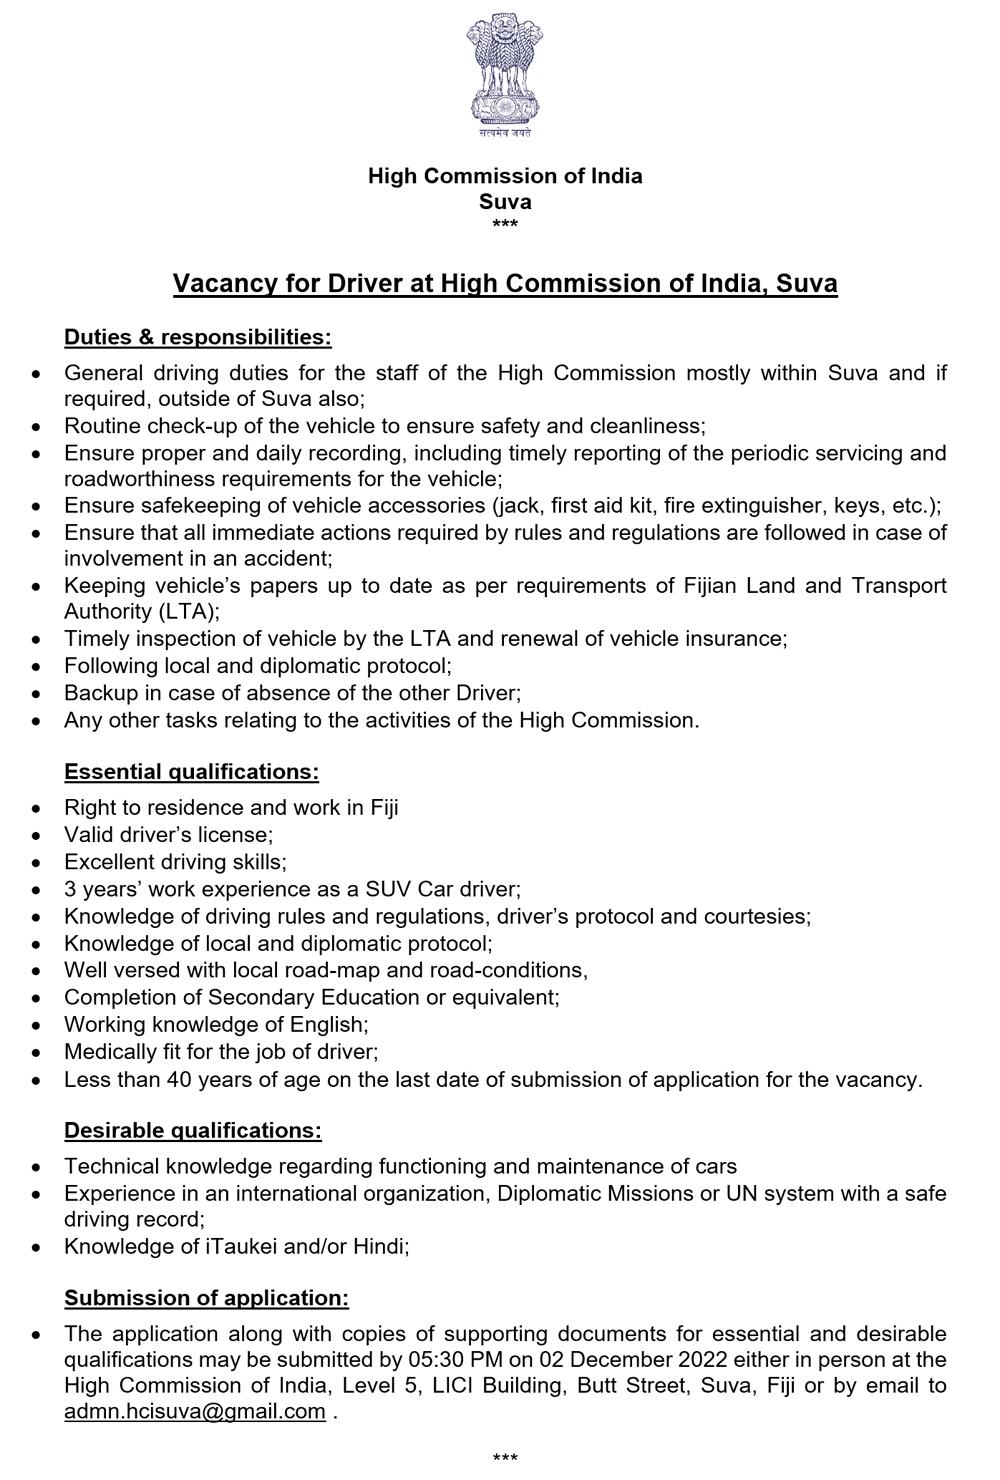 Vacancy  for Driver at High Commission of India in Suva